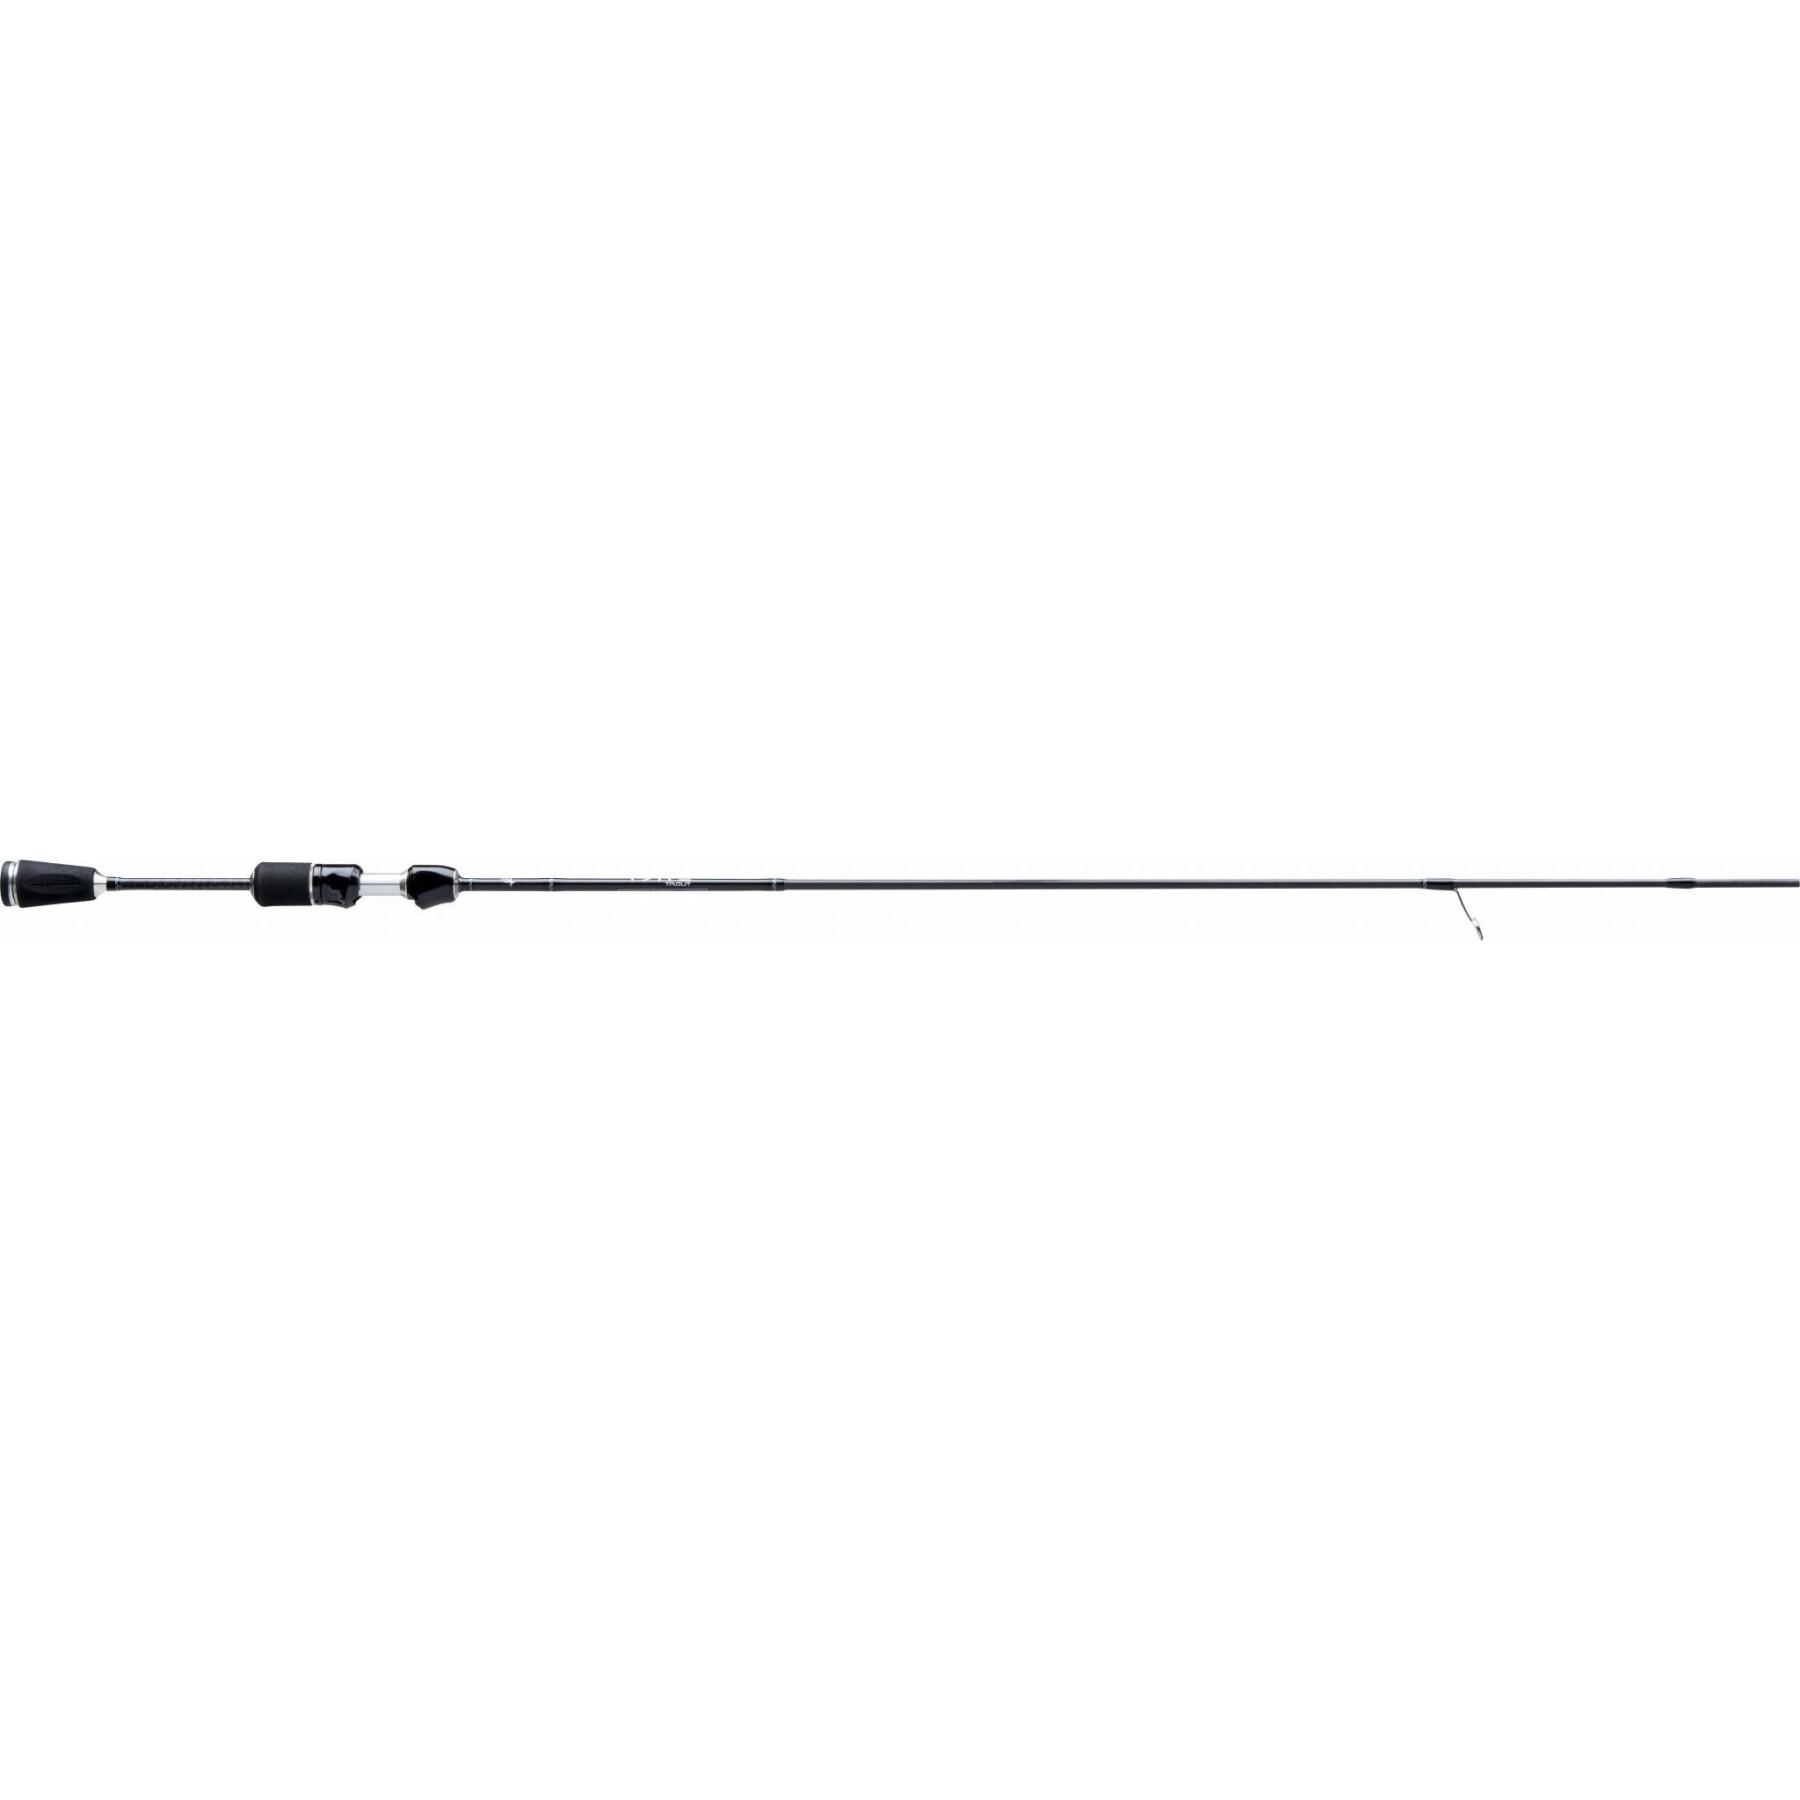 Cana 13 Fishing Fate Trout sp 1,92m 0,5-3,5g